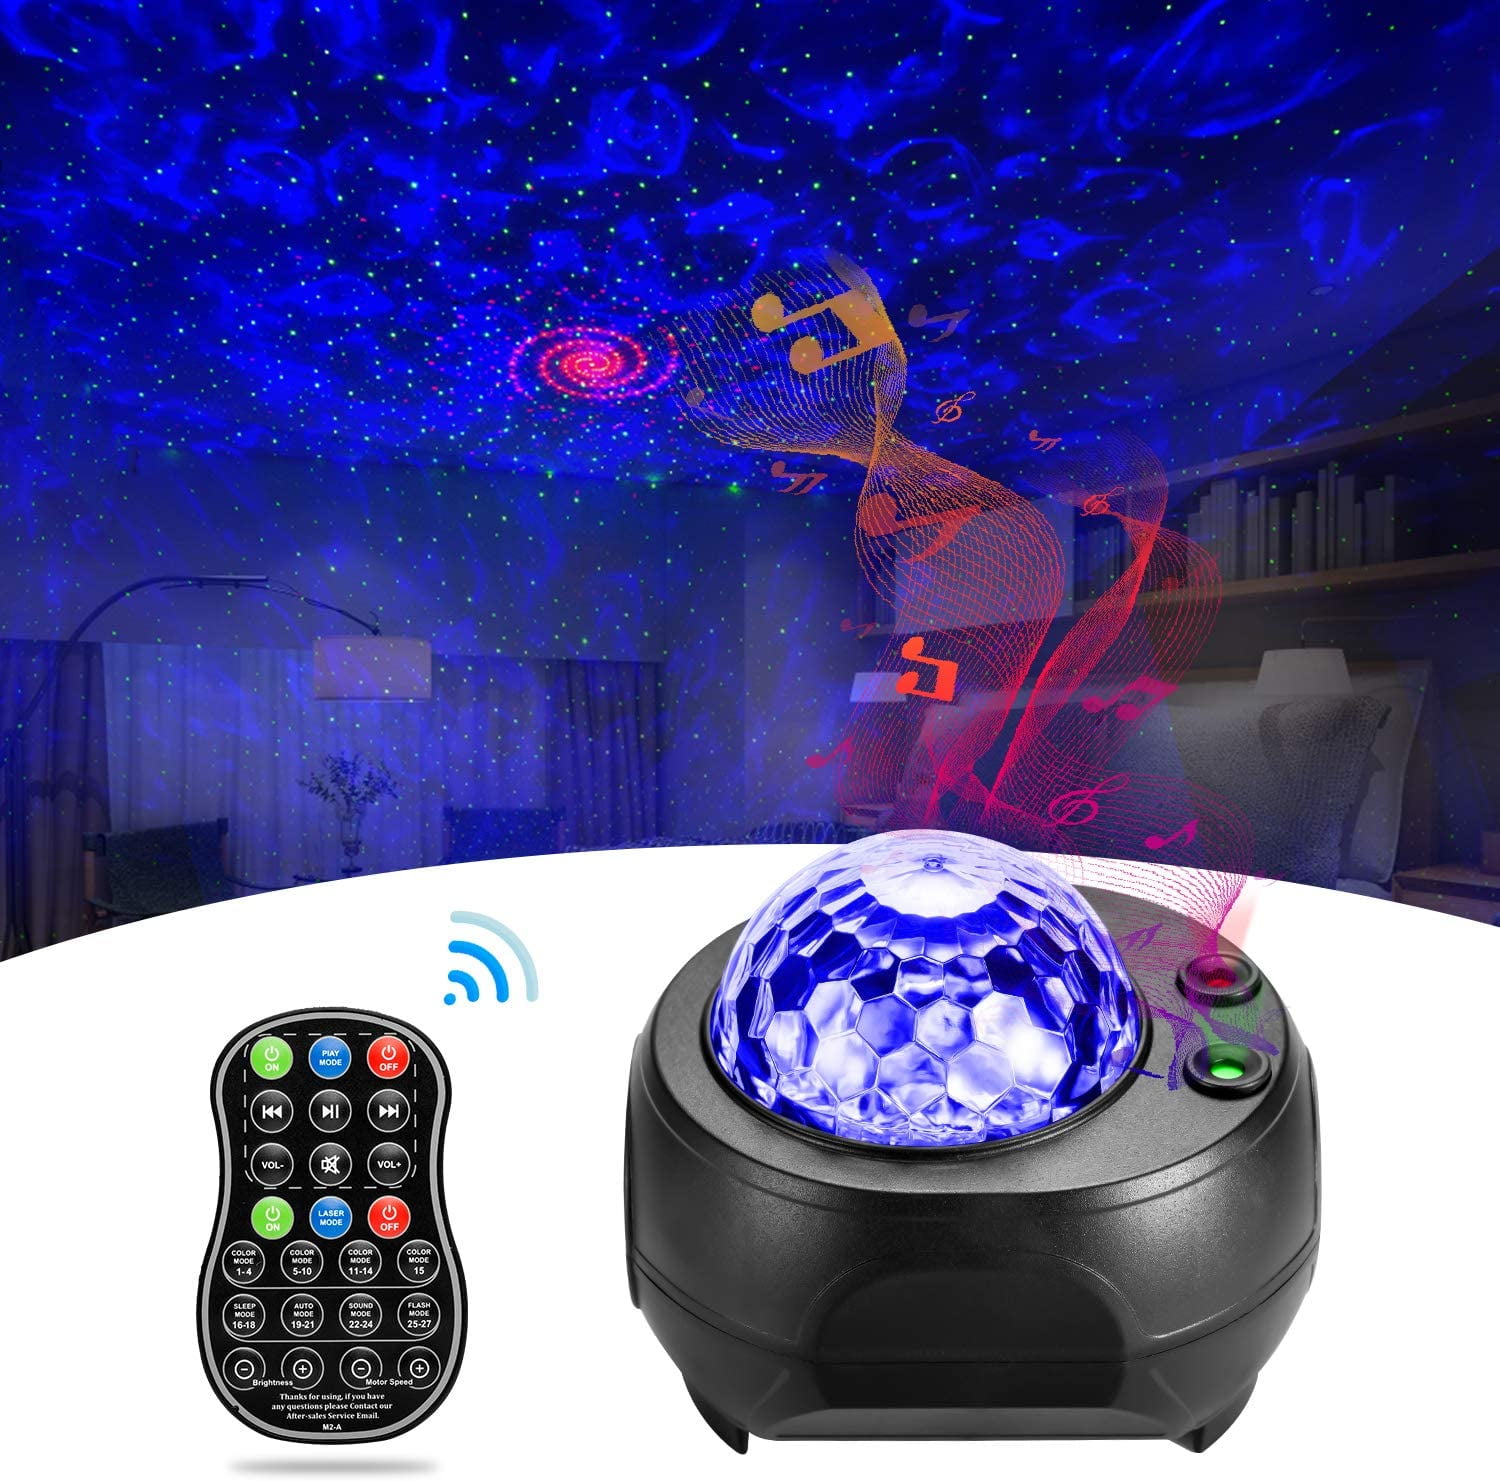 3 in 1 Galaxy Projector Light,Star Projector with Bluetooth Speaker,Sound Activated Design,Starry Night Projector with 28 Light Modes,Remote Control,Night Light Projector for Kids Adults